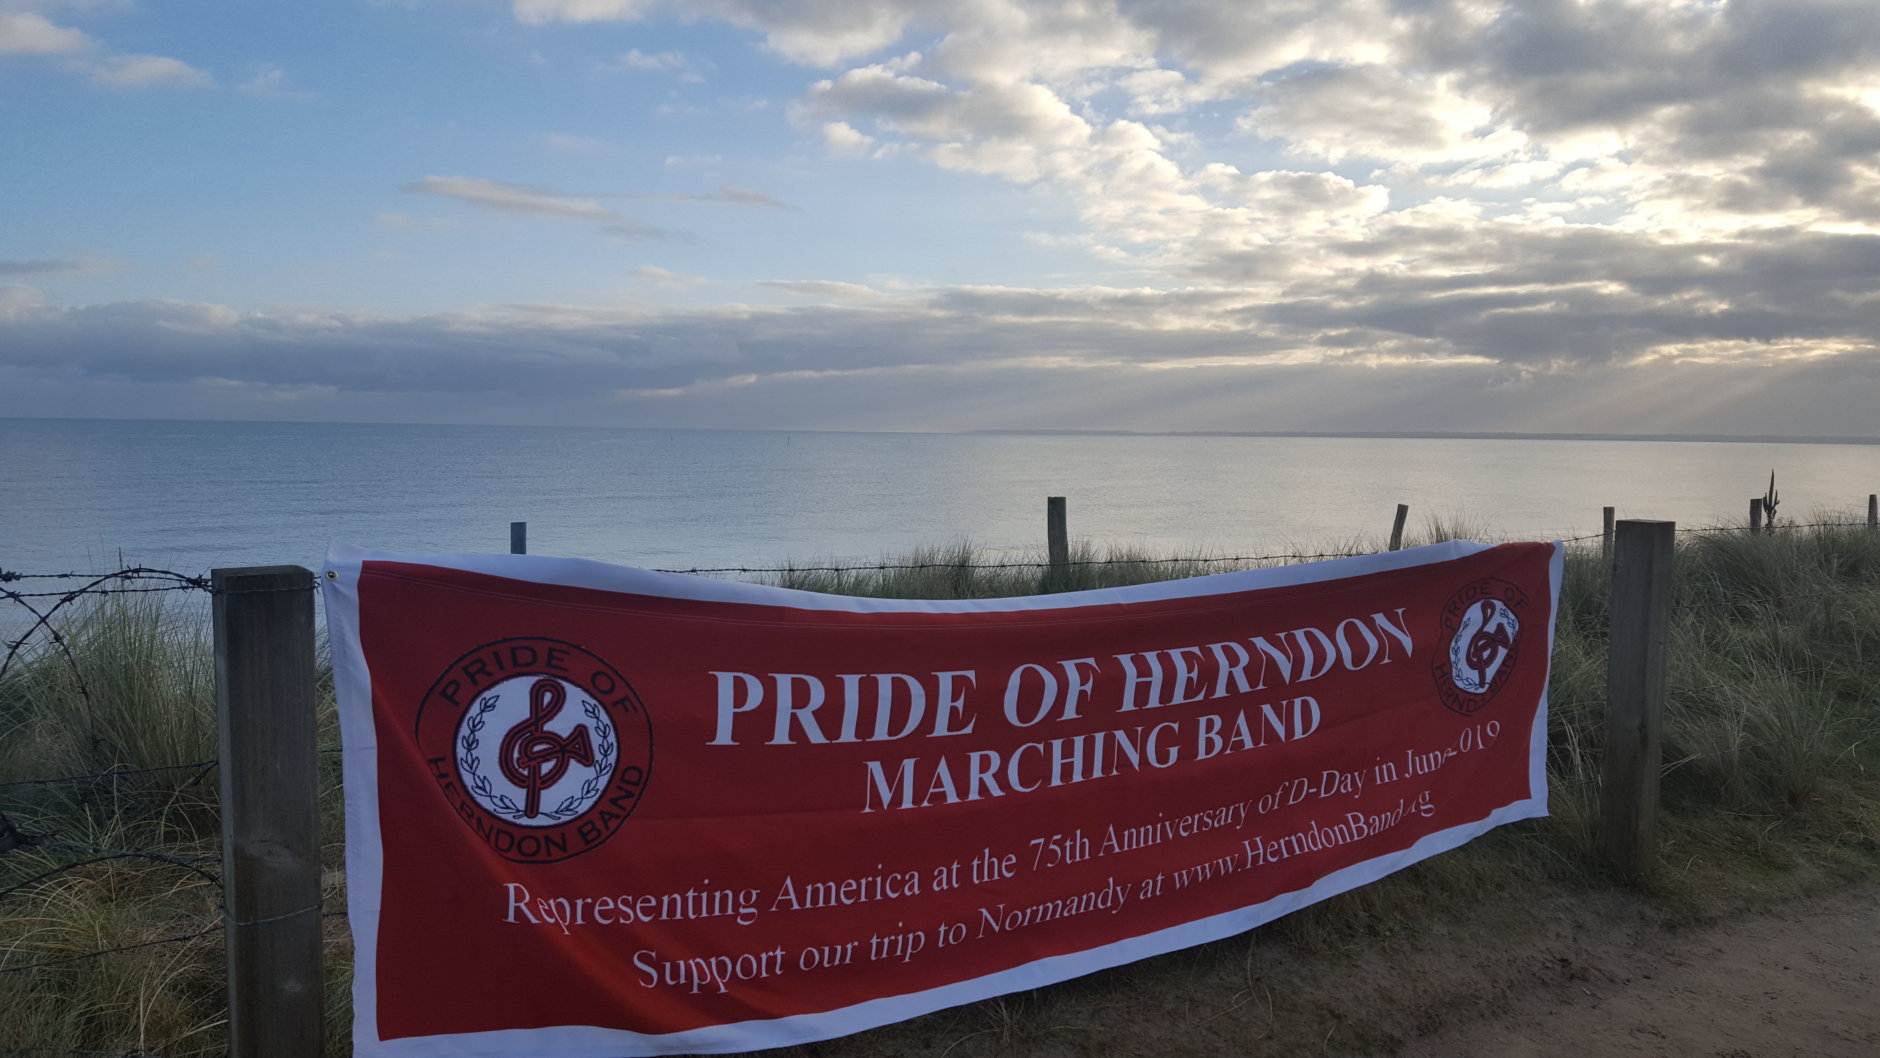 In anticipation of the June 2019 performance in France, band mom Margaret Jamborsky brought the band's banner to Utah Beach, the site of the U.S. Navy Memorial, dedicated to the more than 1,000 sailors who died there. 

"The USS Herndon would have been right in the center of the picture on D-Day," Jamborsky said. "It was quite moving to see such a beautiful, serene place, a far cry from what it would have looked like that day in 1944." (Courtesy Margaret Jamborsky)